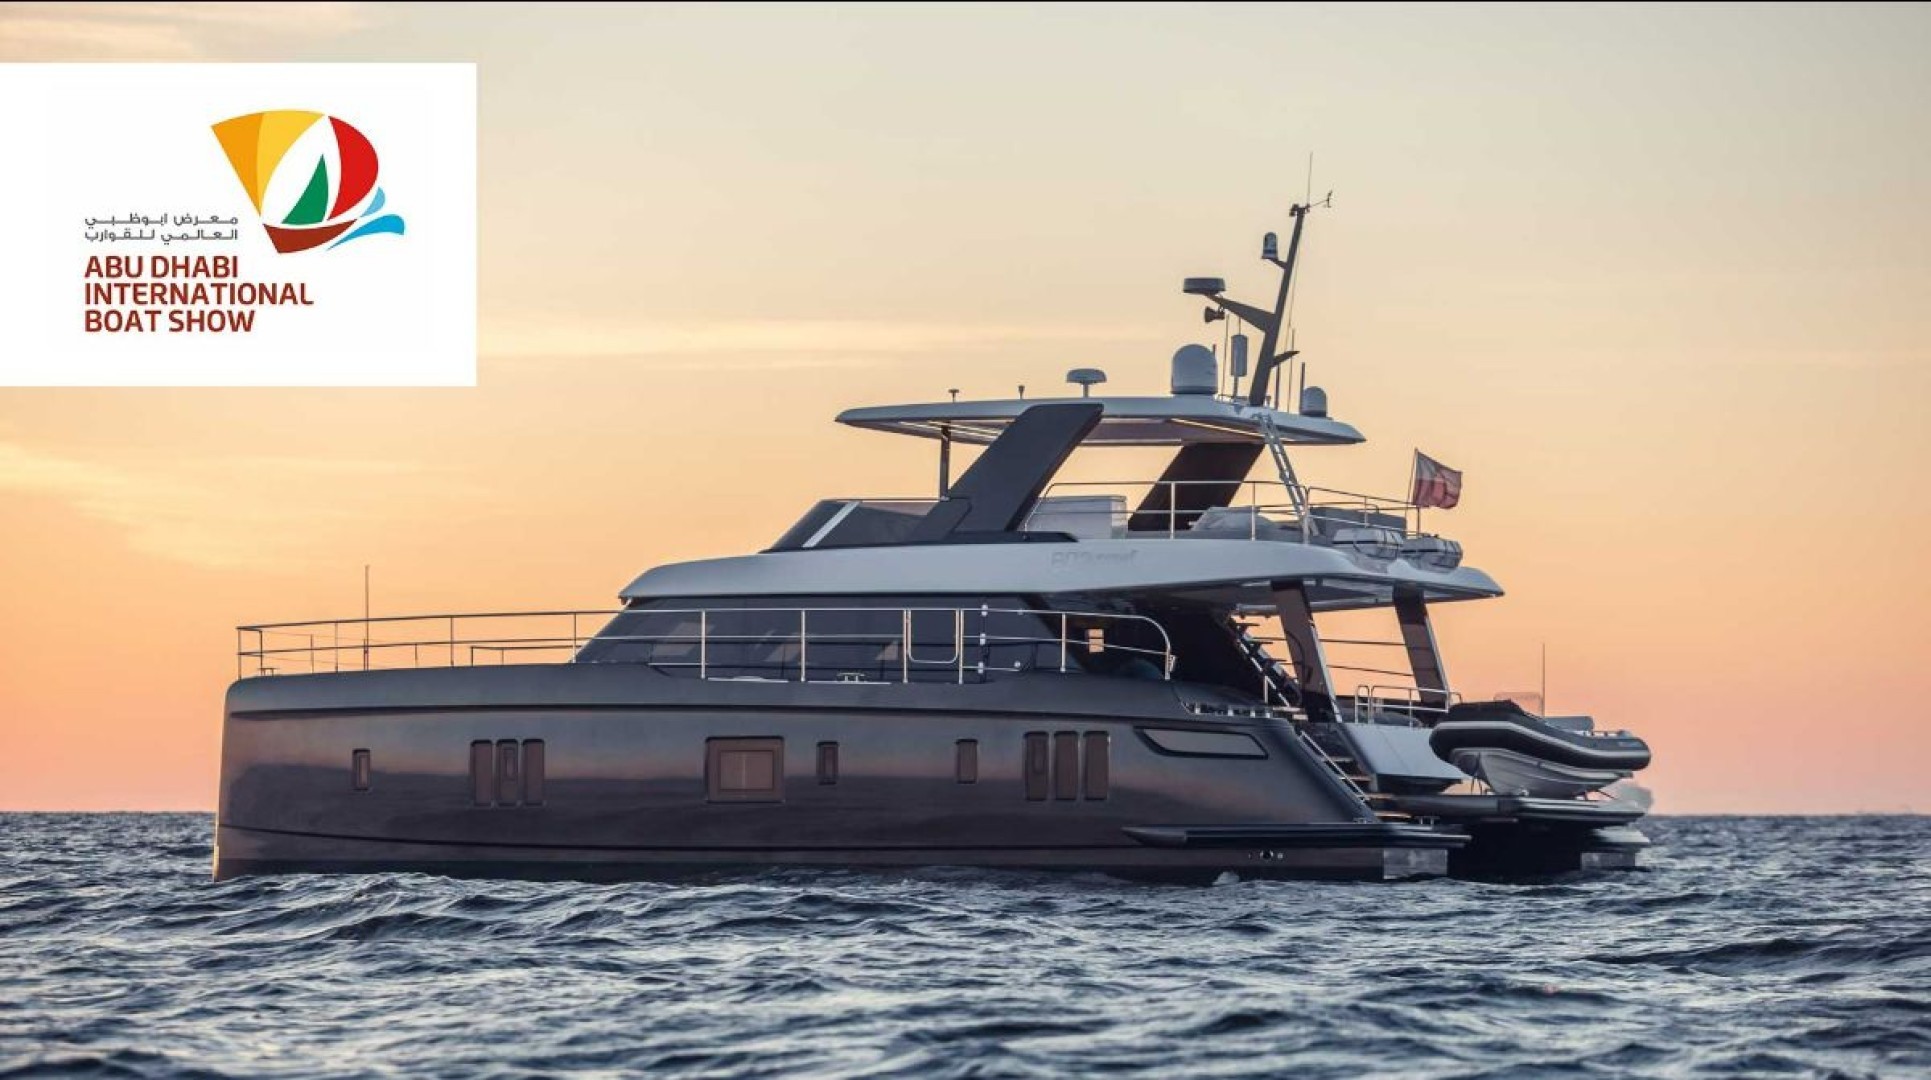 Middle East Premiere of the 60 Sunreef Power: Abu Dhabi International Boat Show